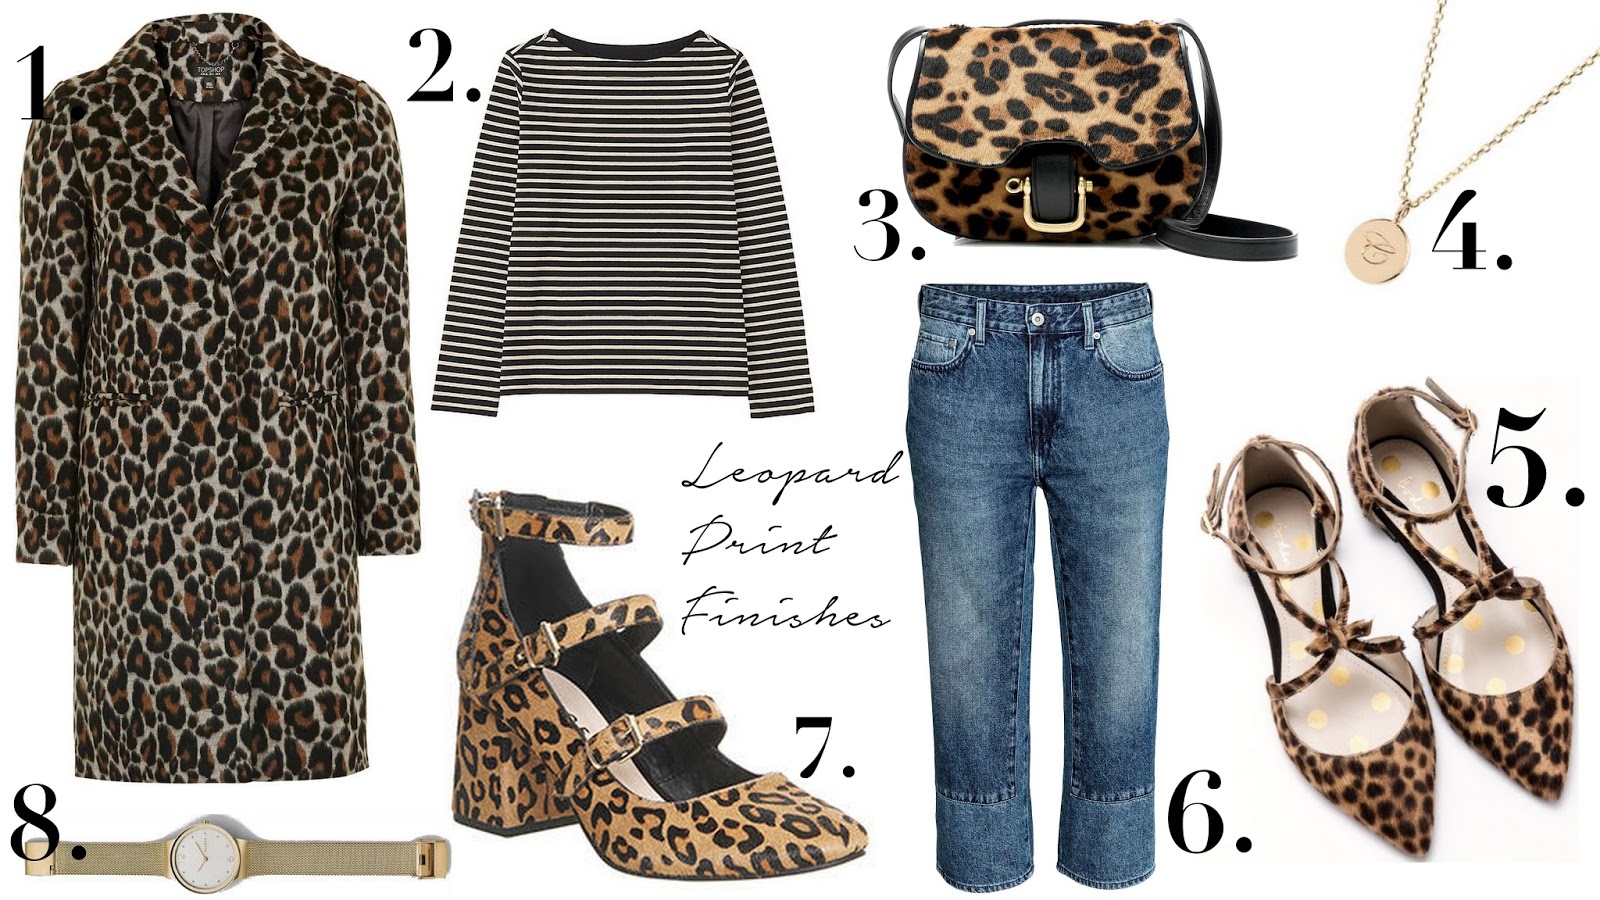 A touch of leopard print